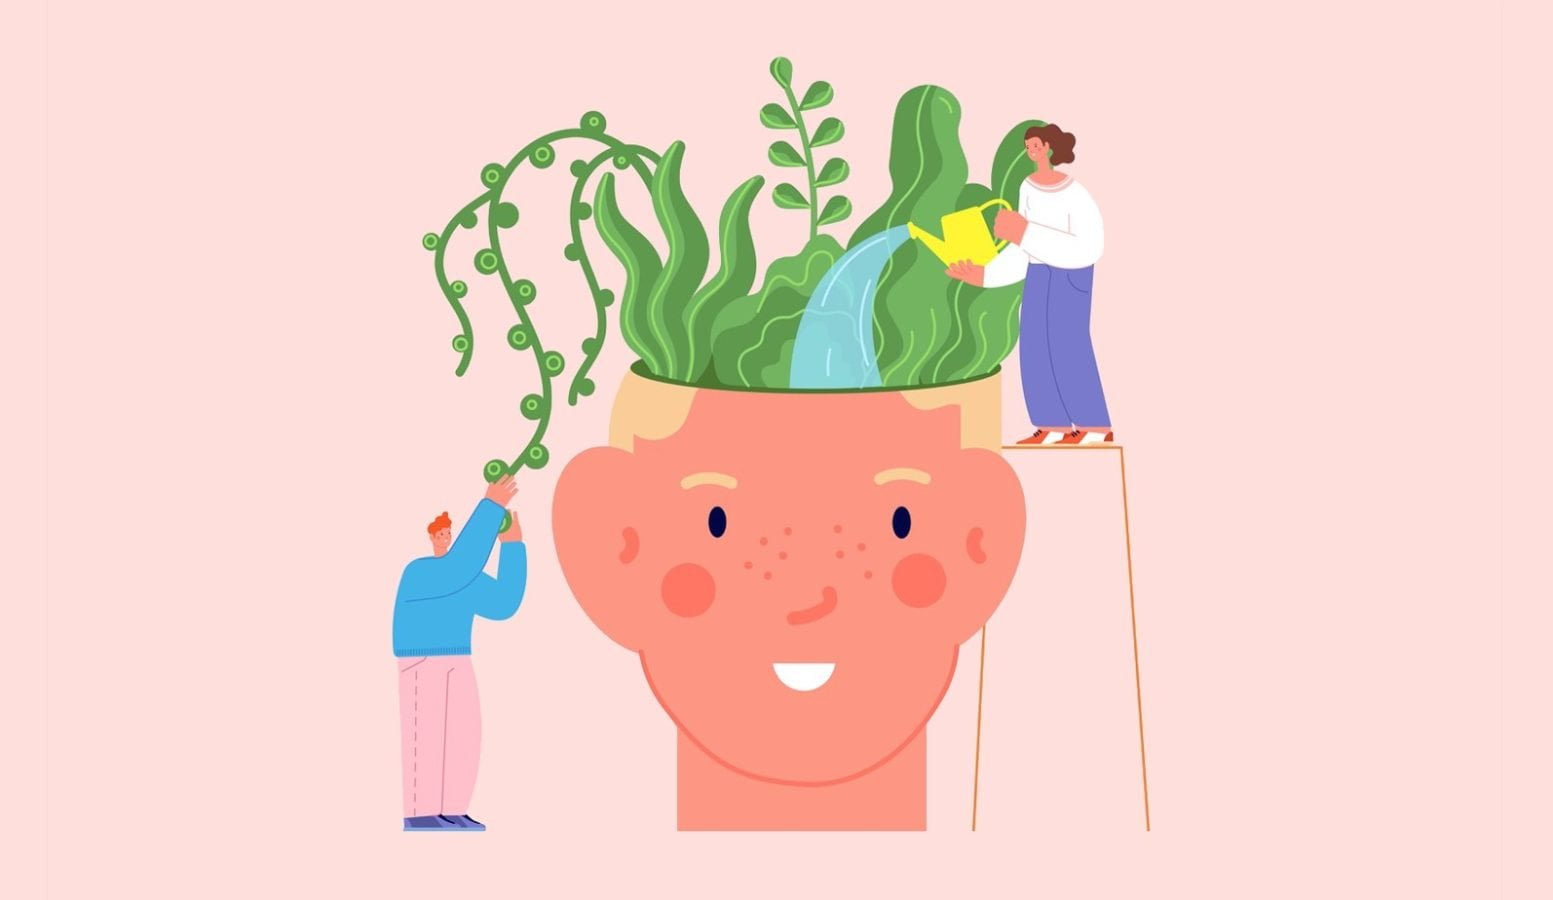 Animation of two people watering someone's mind, growing it like a garden.